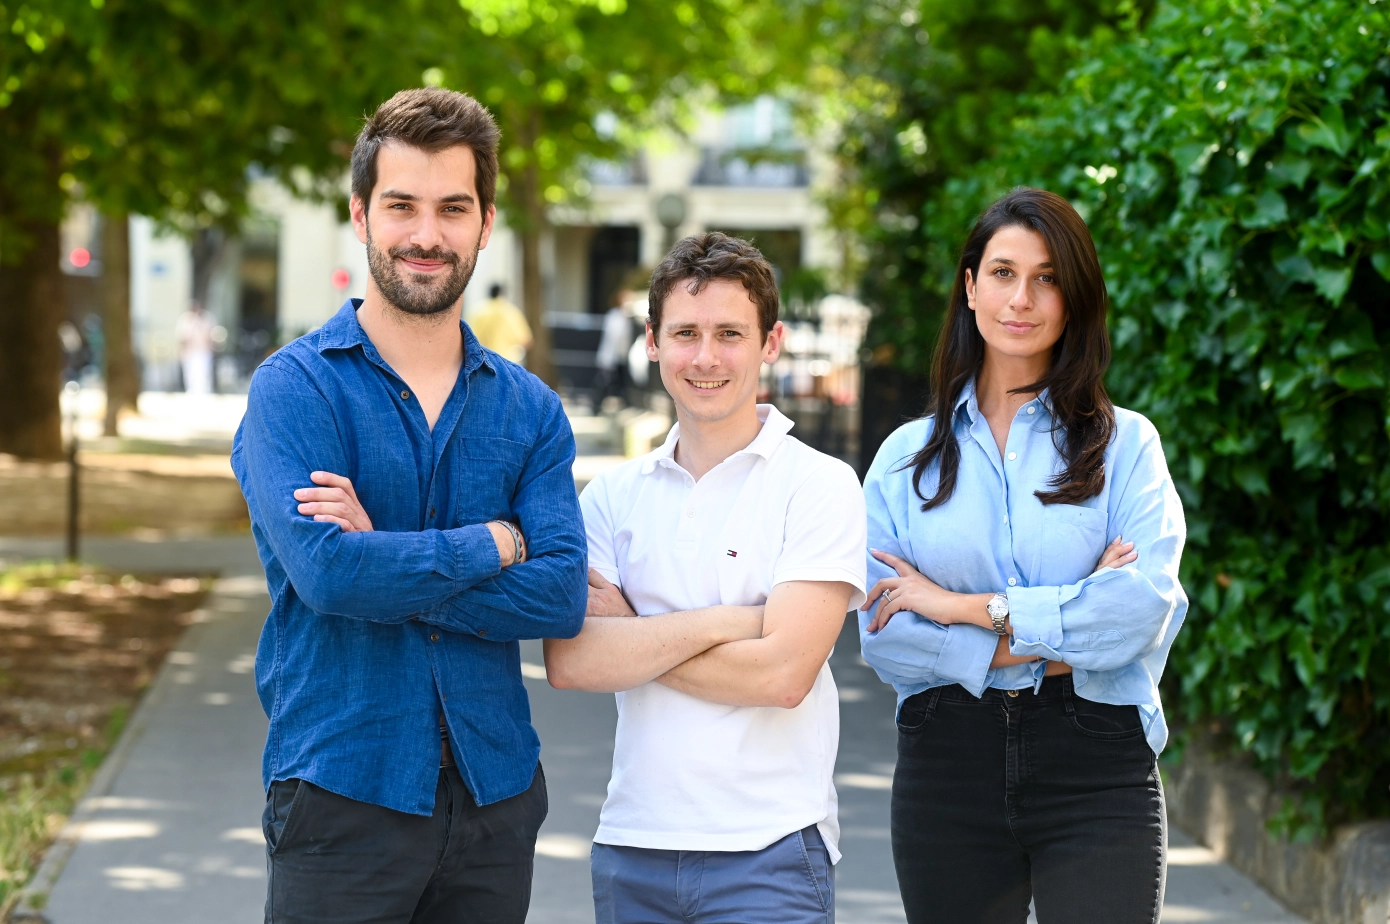 Flowie co-founders Yann Ravel-Sibillot (former CTO at Big Mamma and previously worked at Sunday), Rémi Legorrec, and Aurélie Hadida.